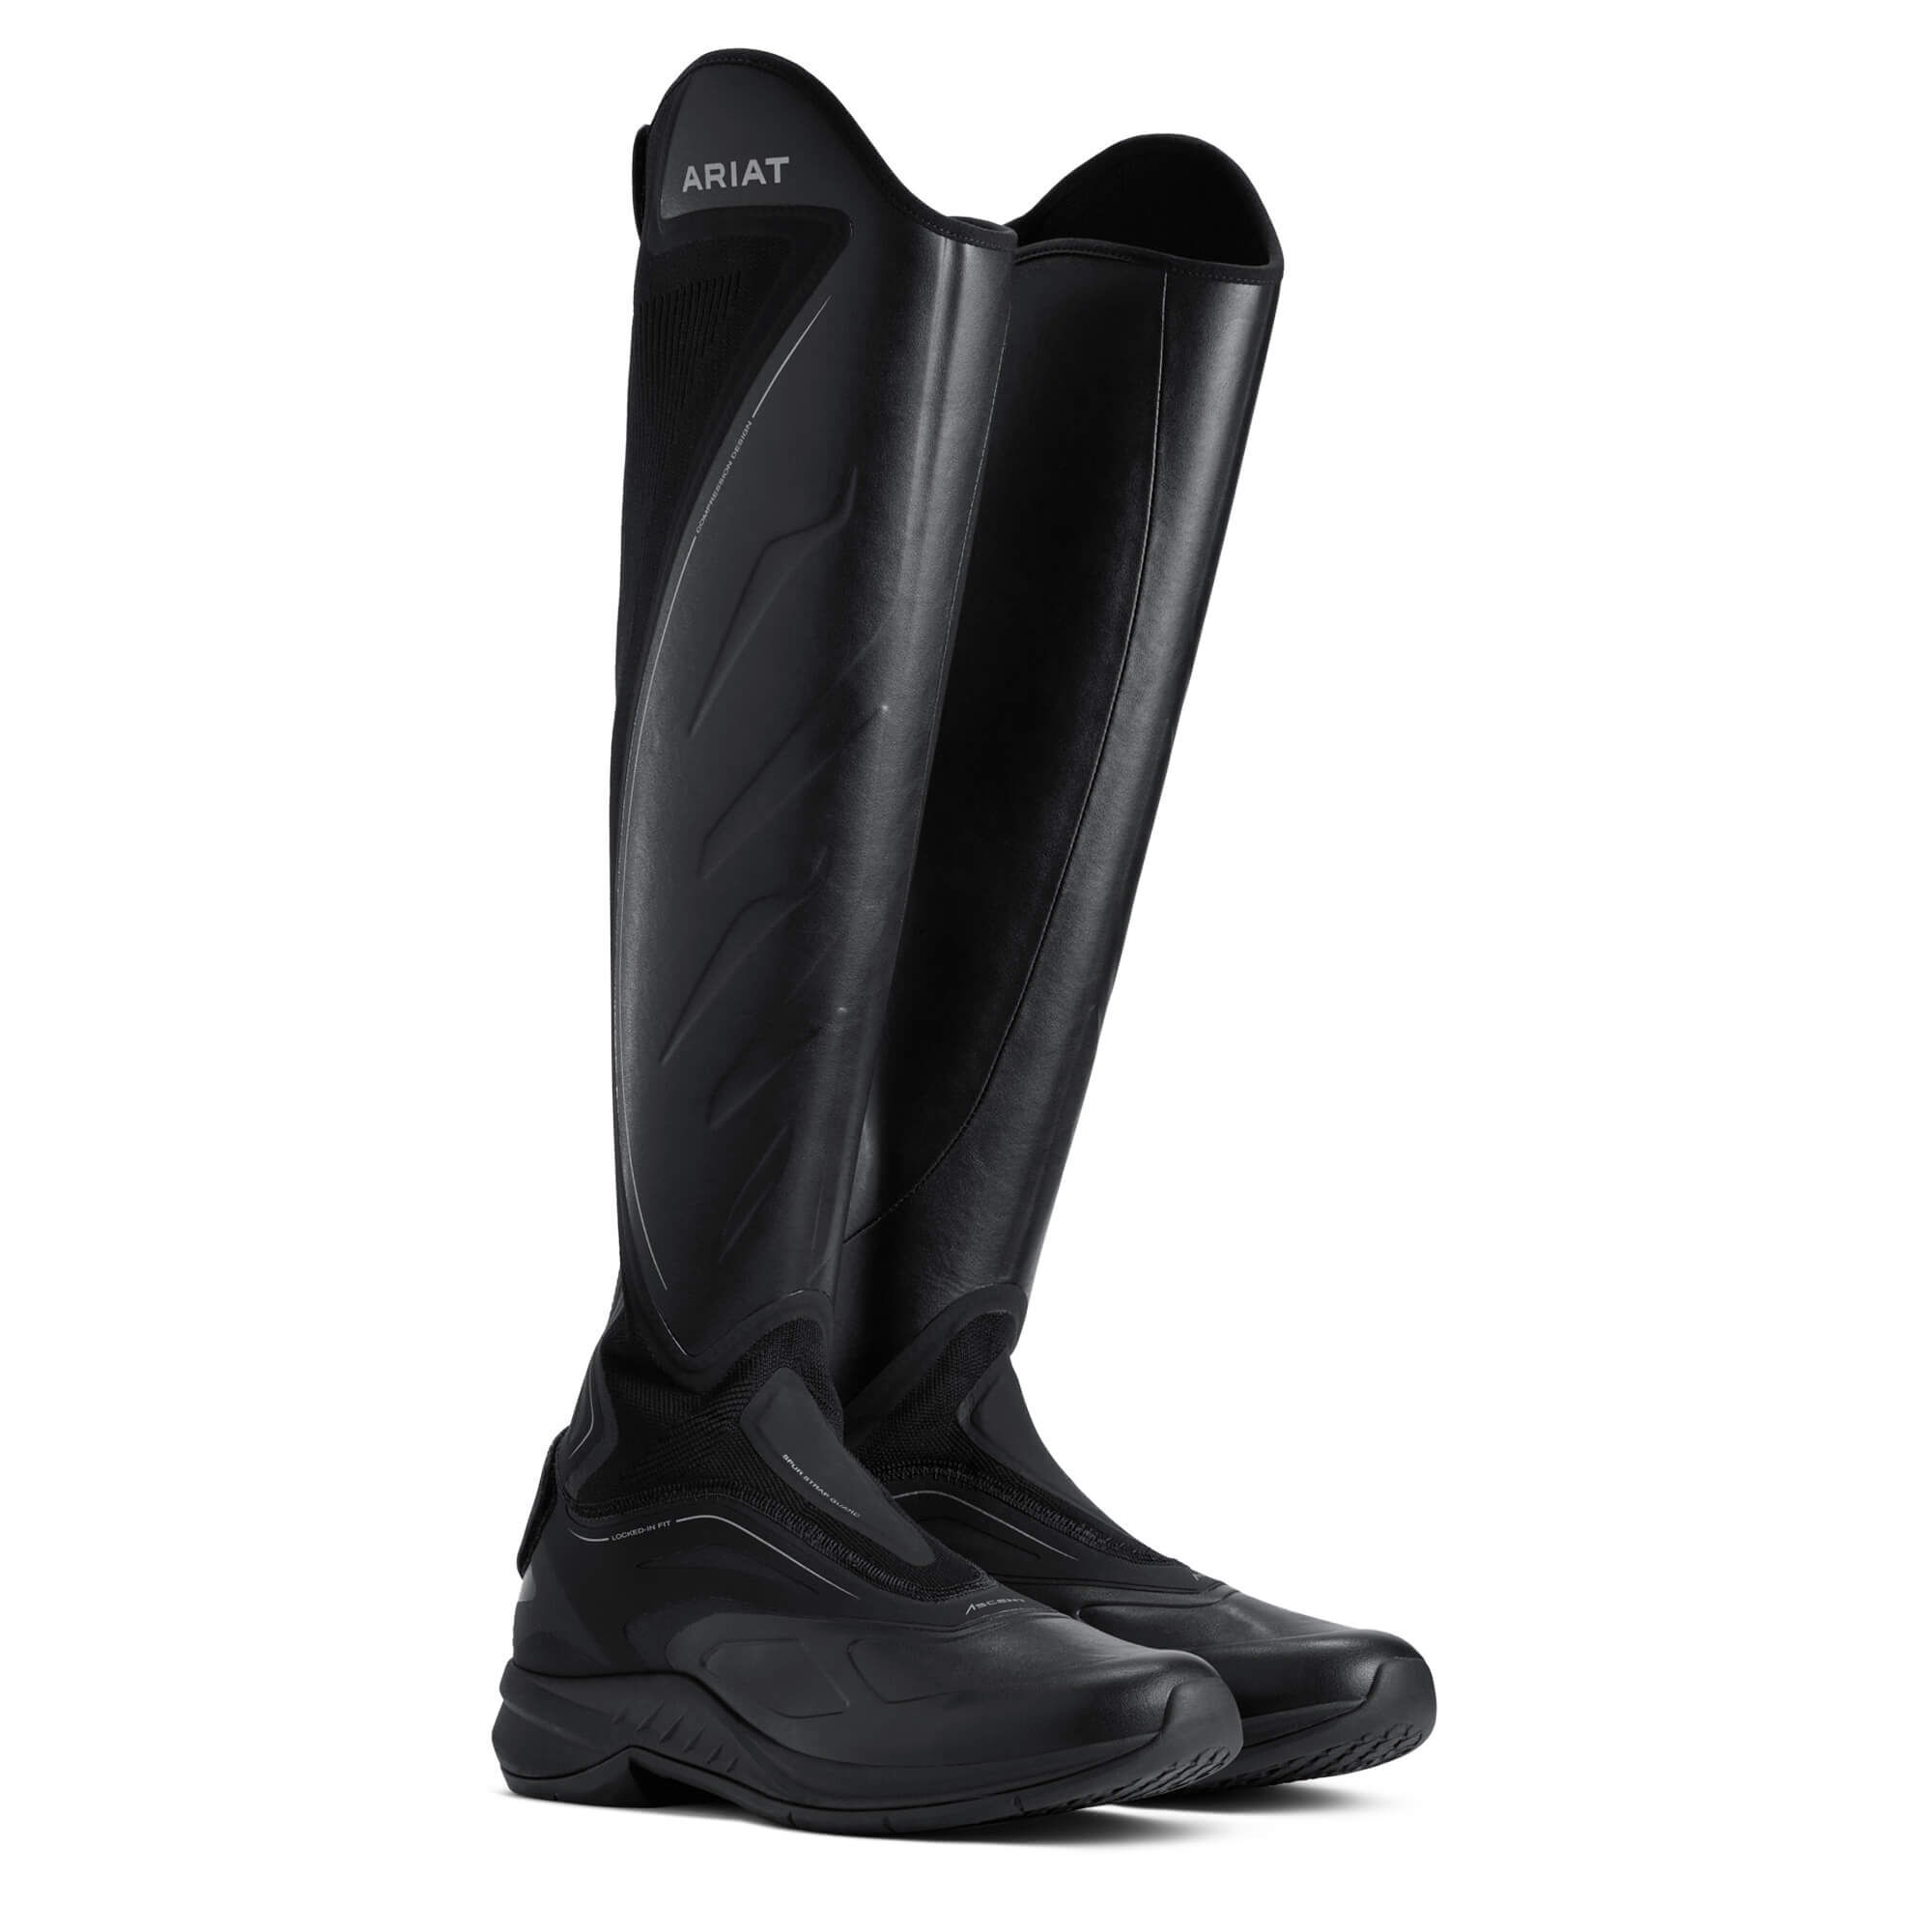 ARIAT Ascent Tall Womens Riding Boot Black 